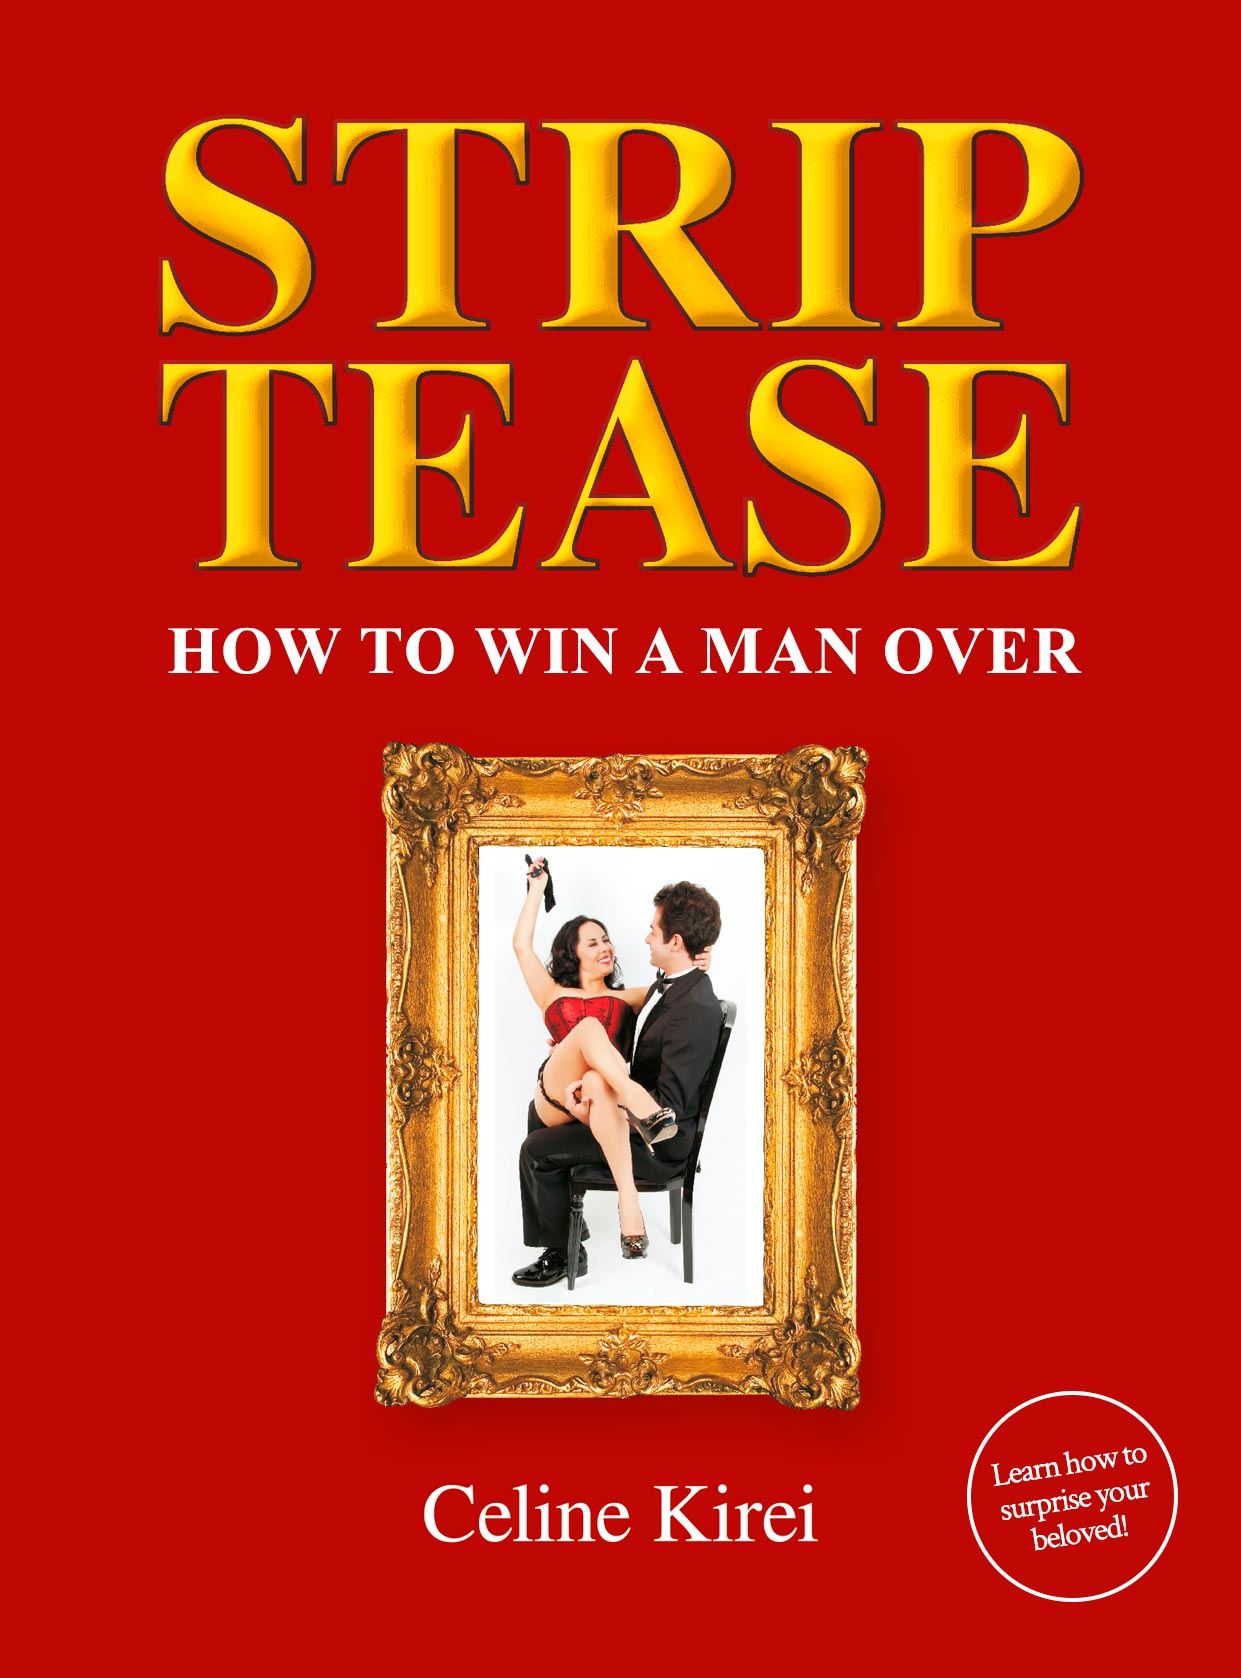 Striptease – How to win a man over